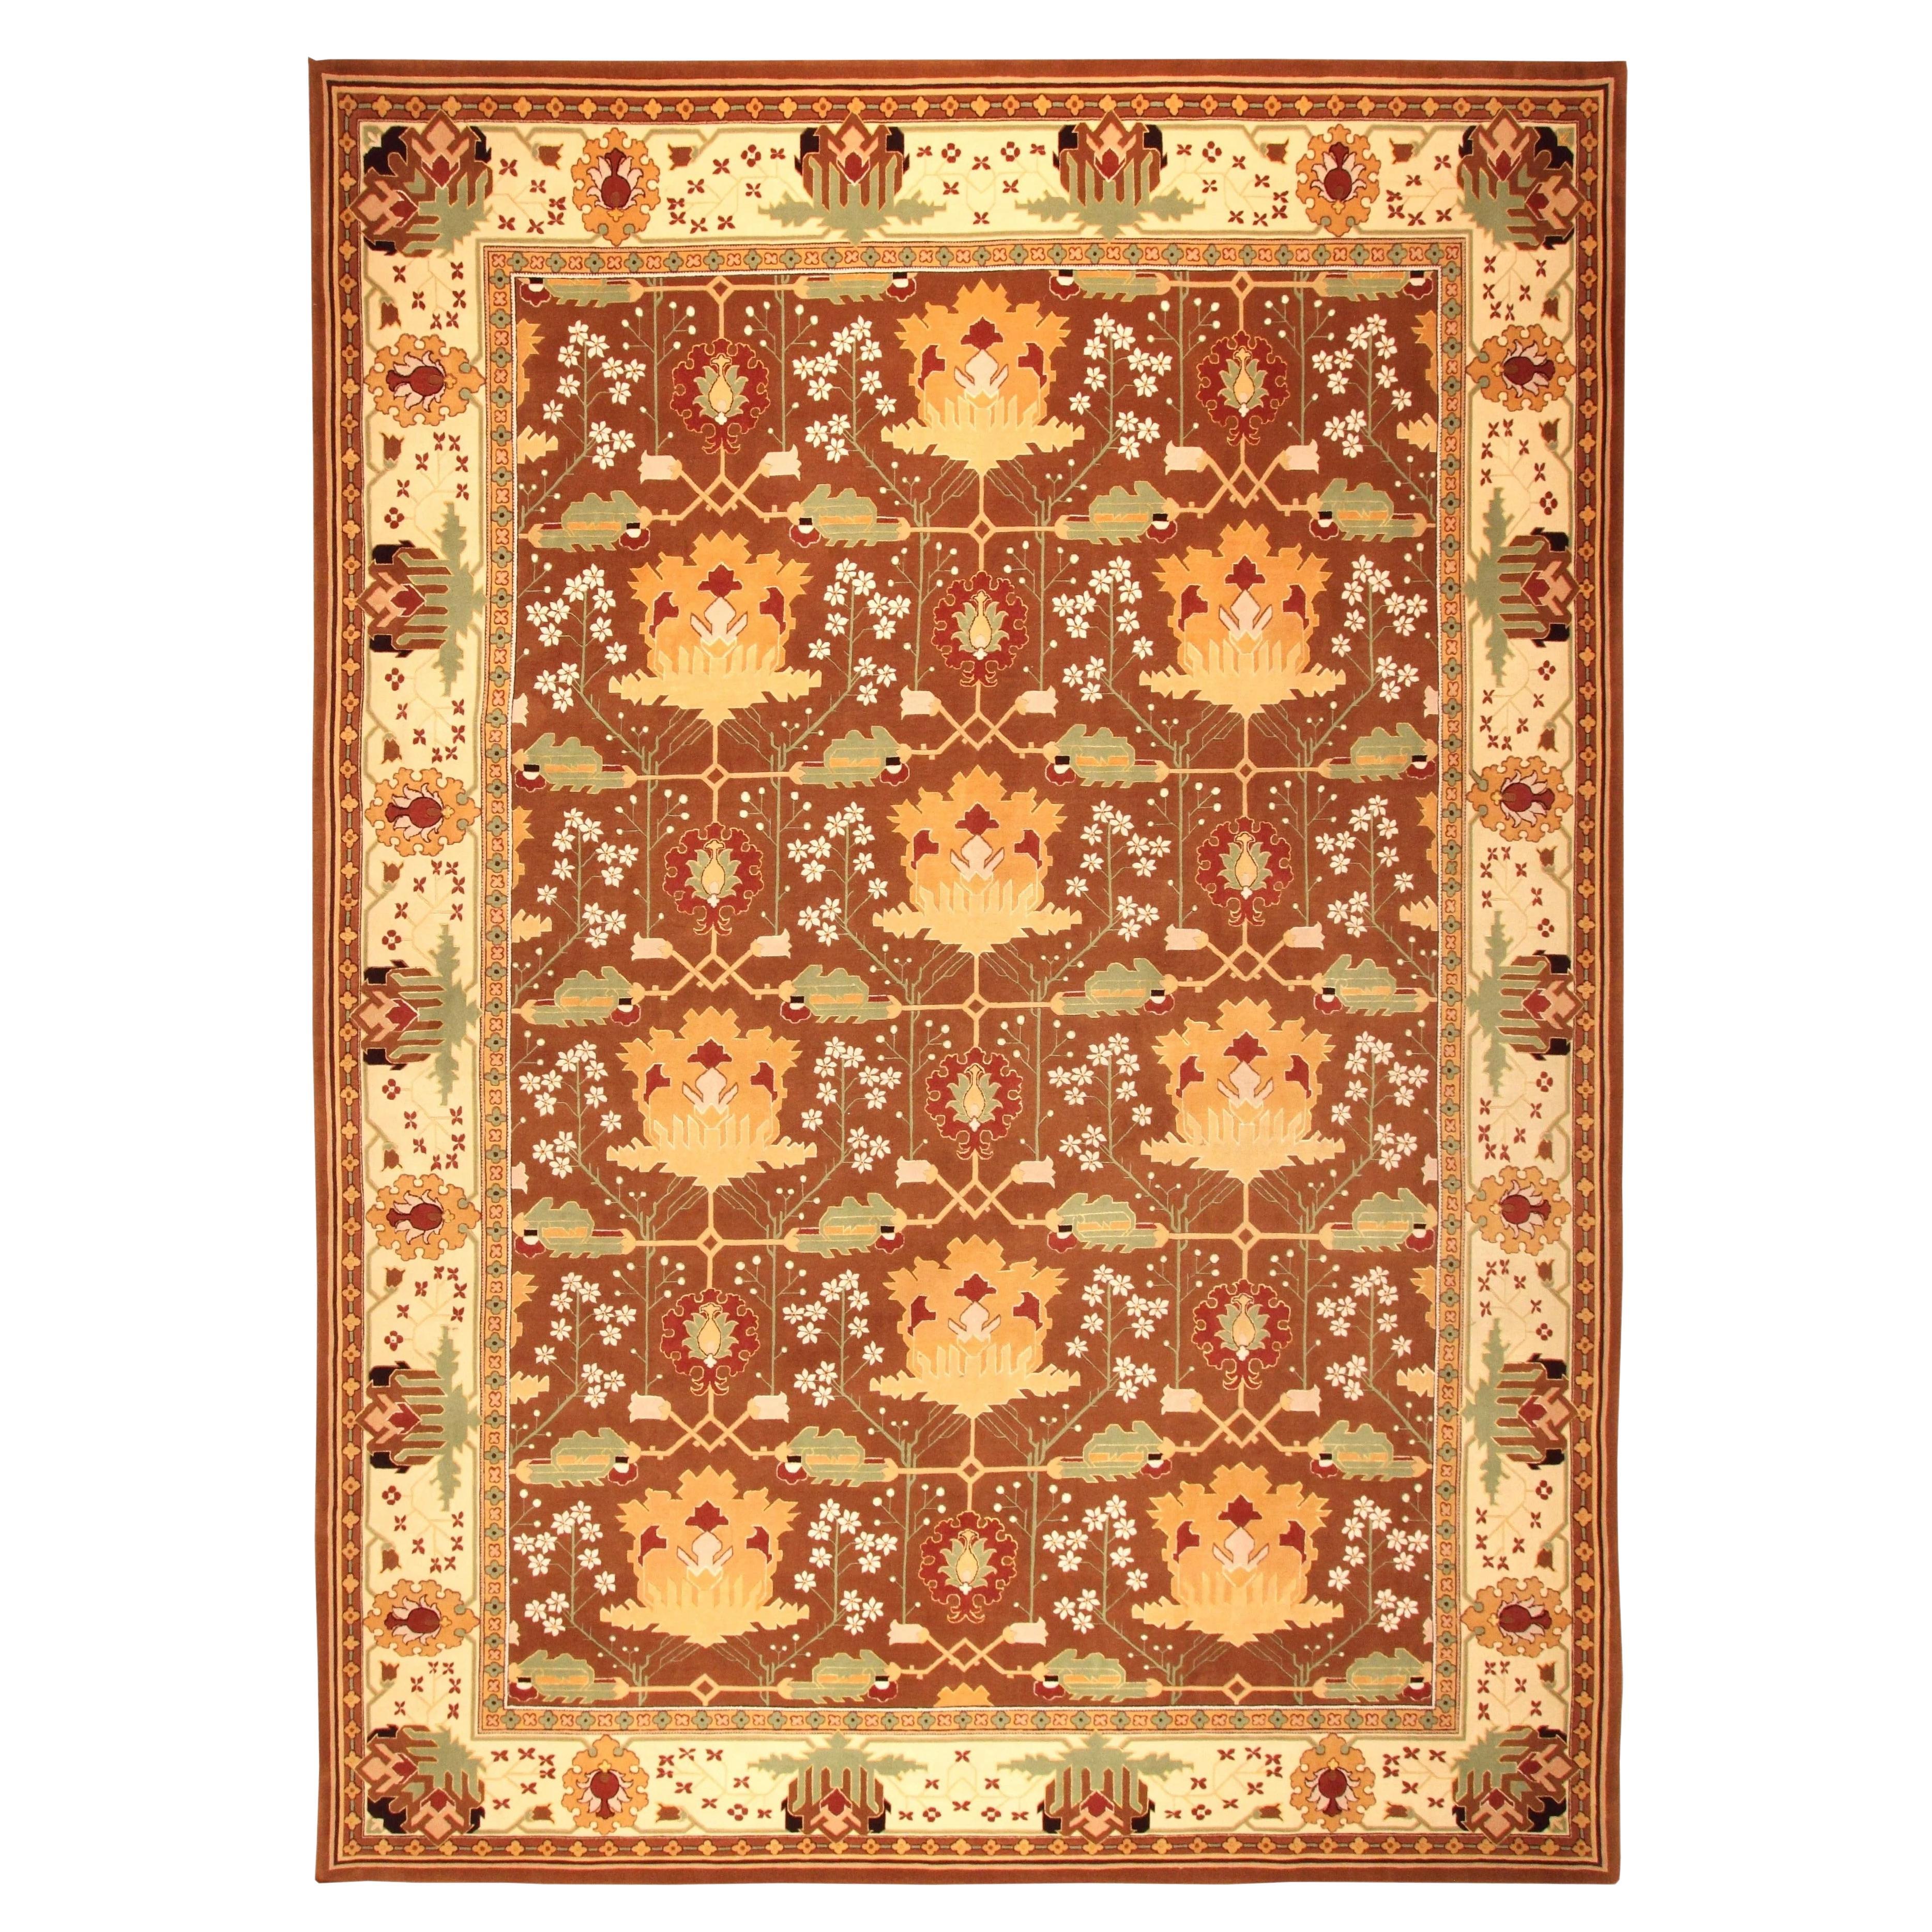 VIA COMO 'Japures Marr' Hand Knotted Wool&Silk Rug 10x14 ft One of a Kind Carpet For Sale